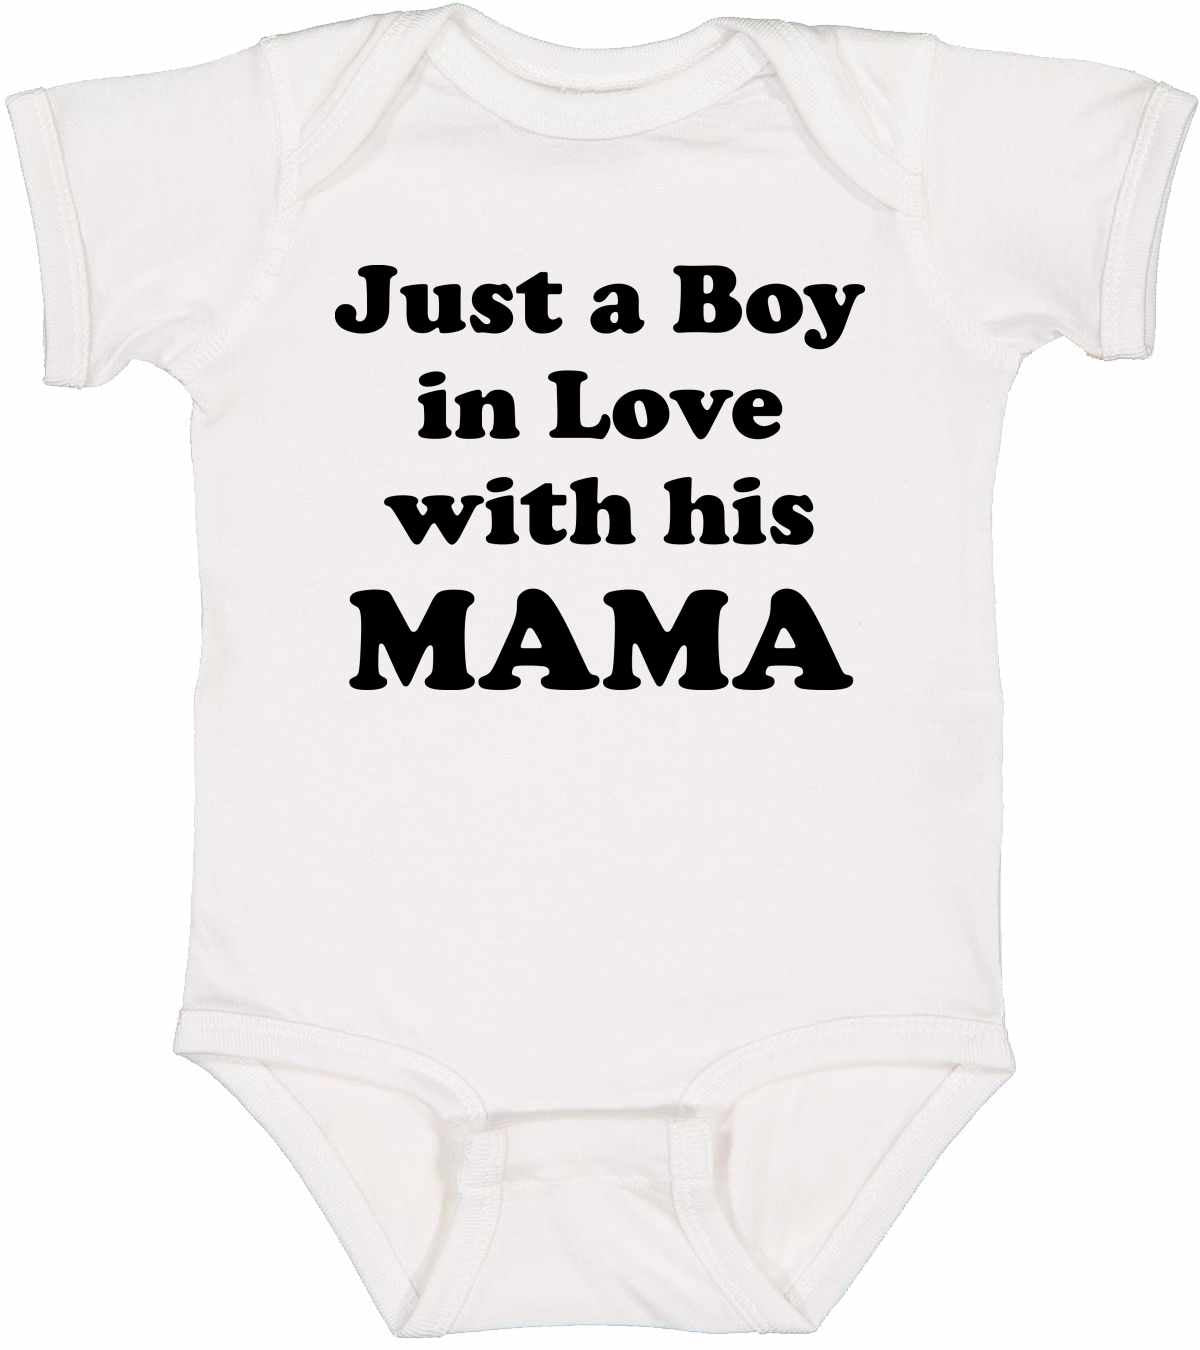 Just a Boy in Love with his MAMA Infant BodySuit (#1097-10)